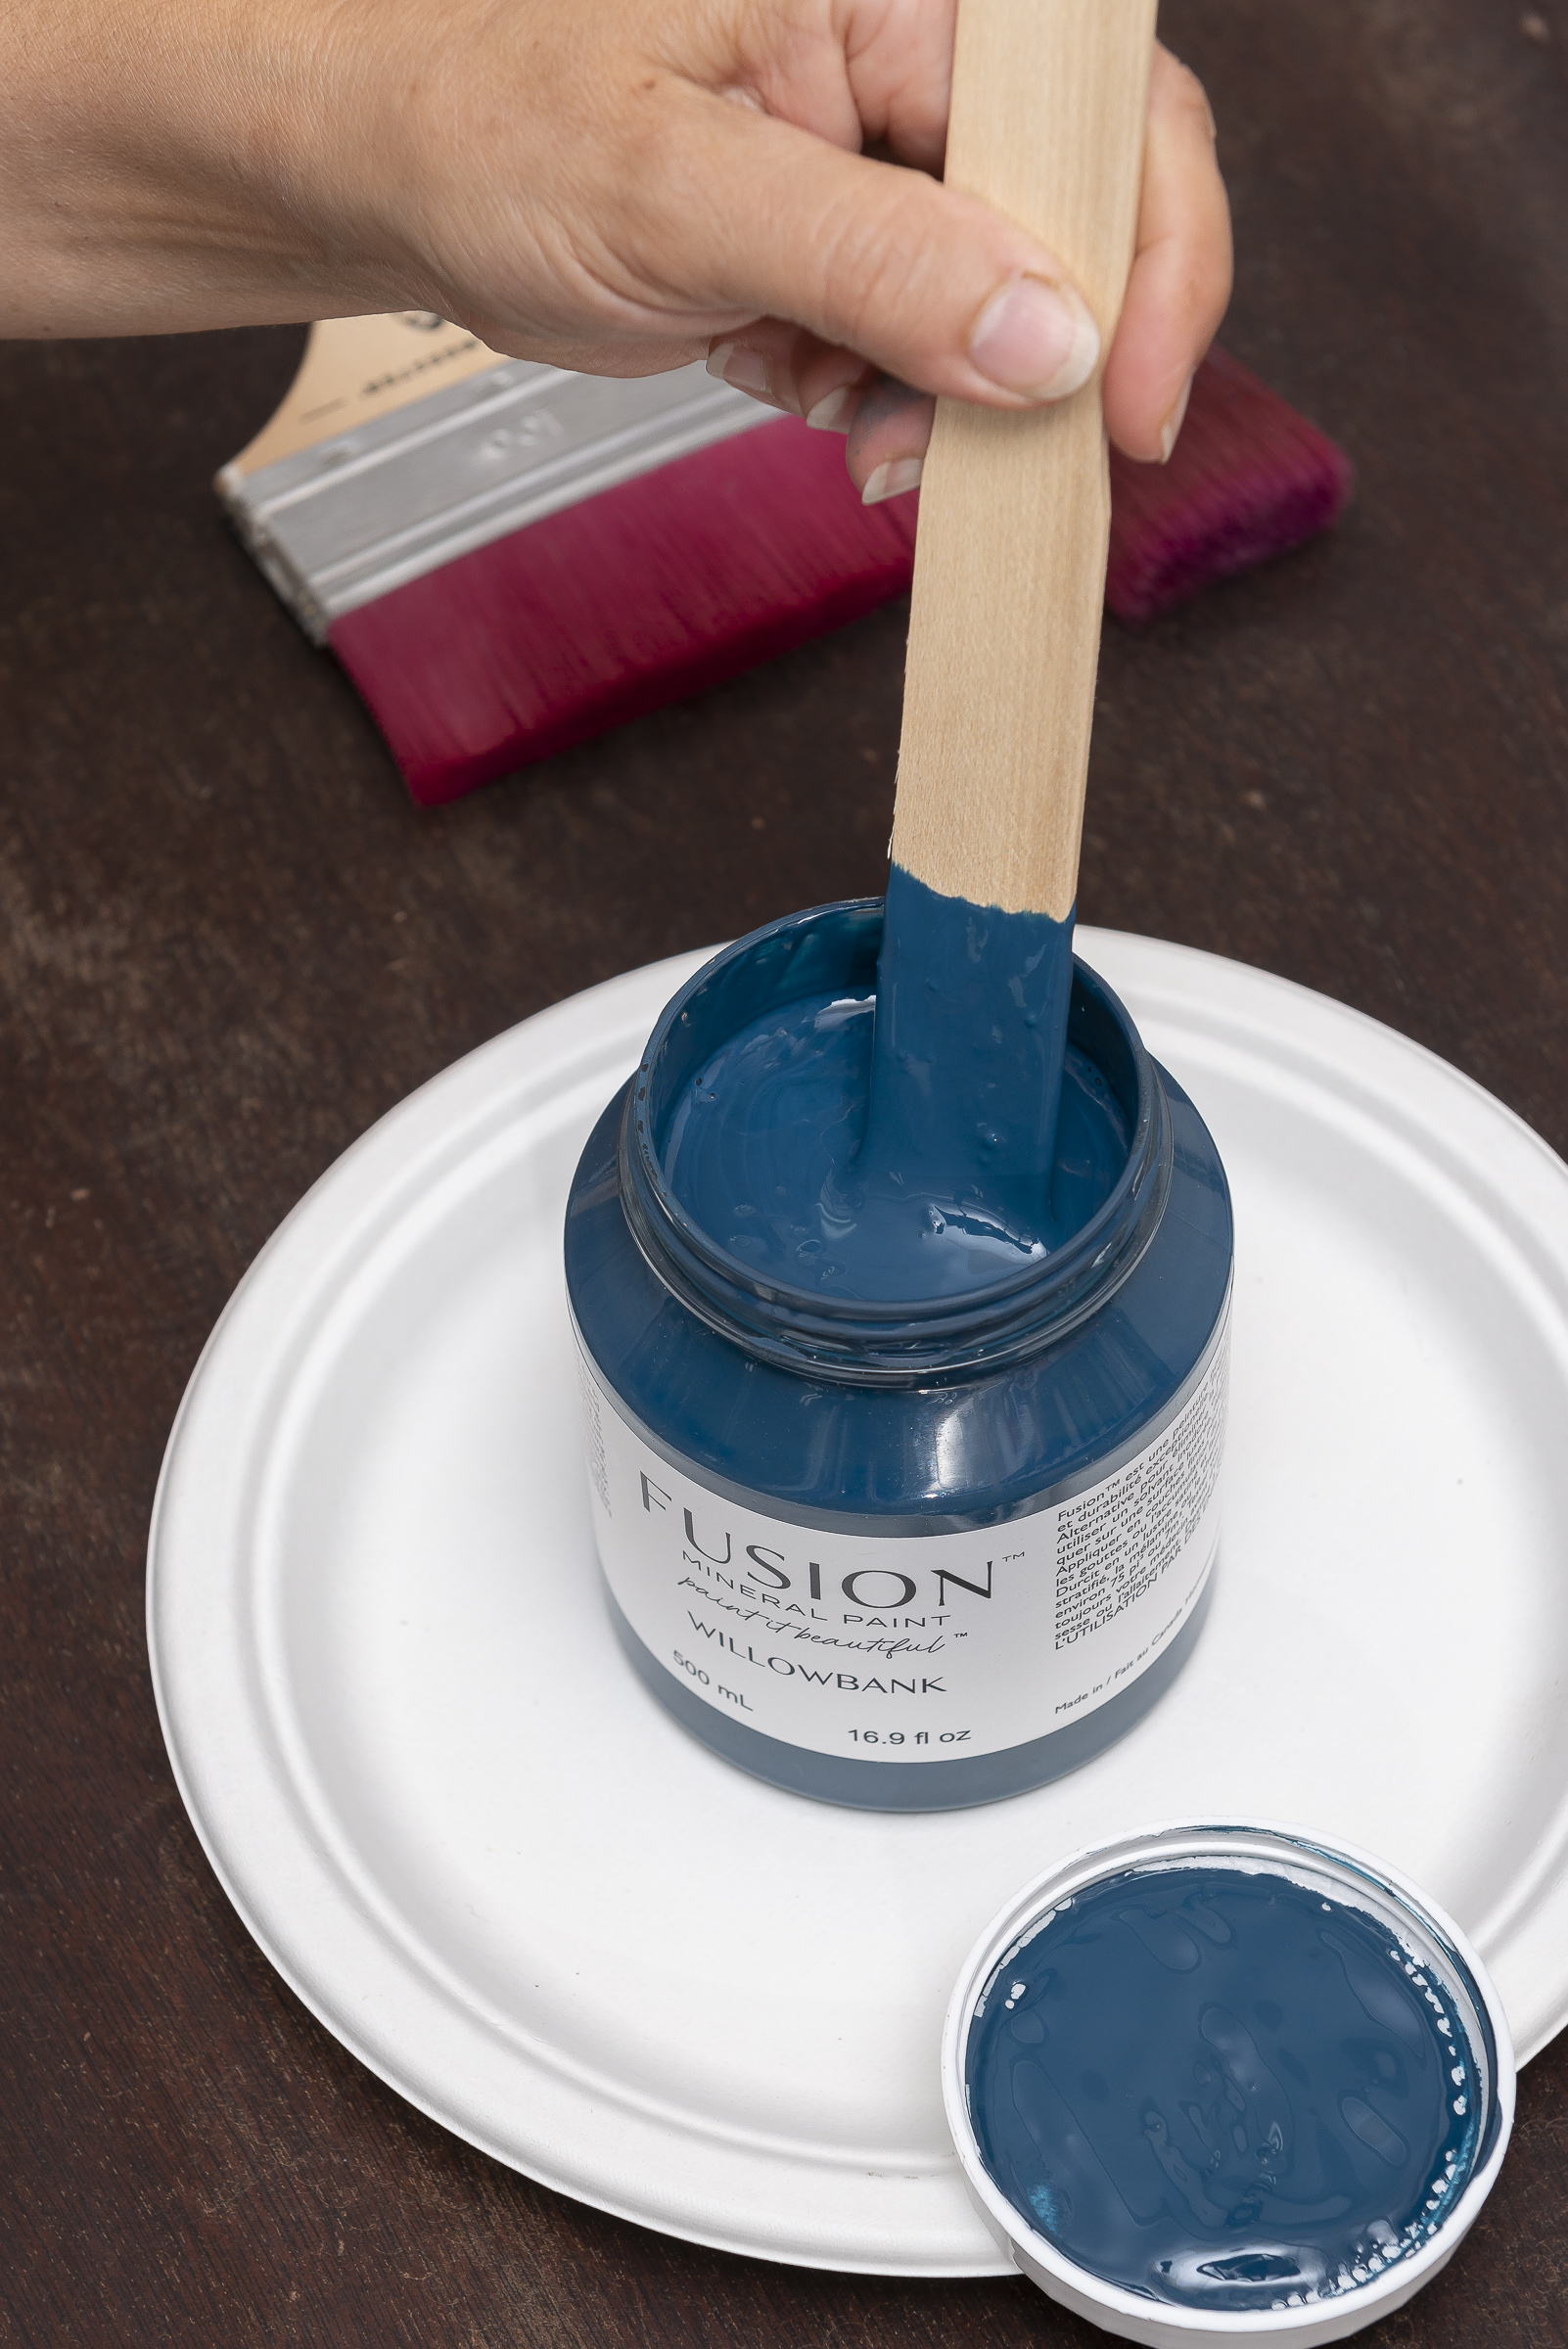 Willowbank a new Fusion Mineral Paint colour